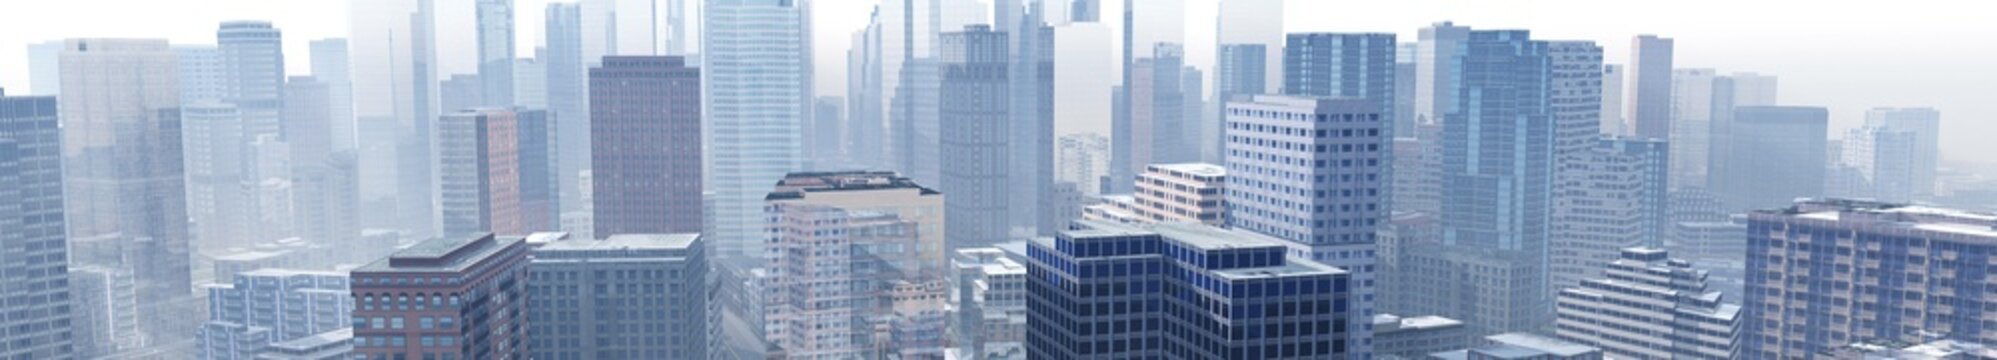 City in the morning in the fog, panorama of skyscrapers, high-rise buildings in the haze, 3D rendering